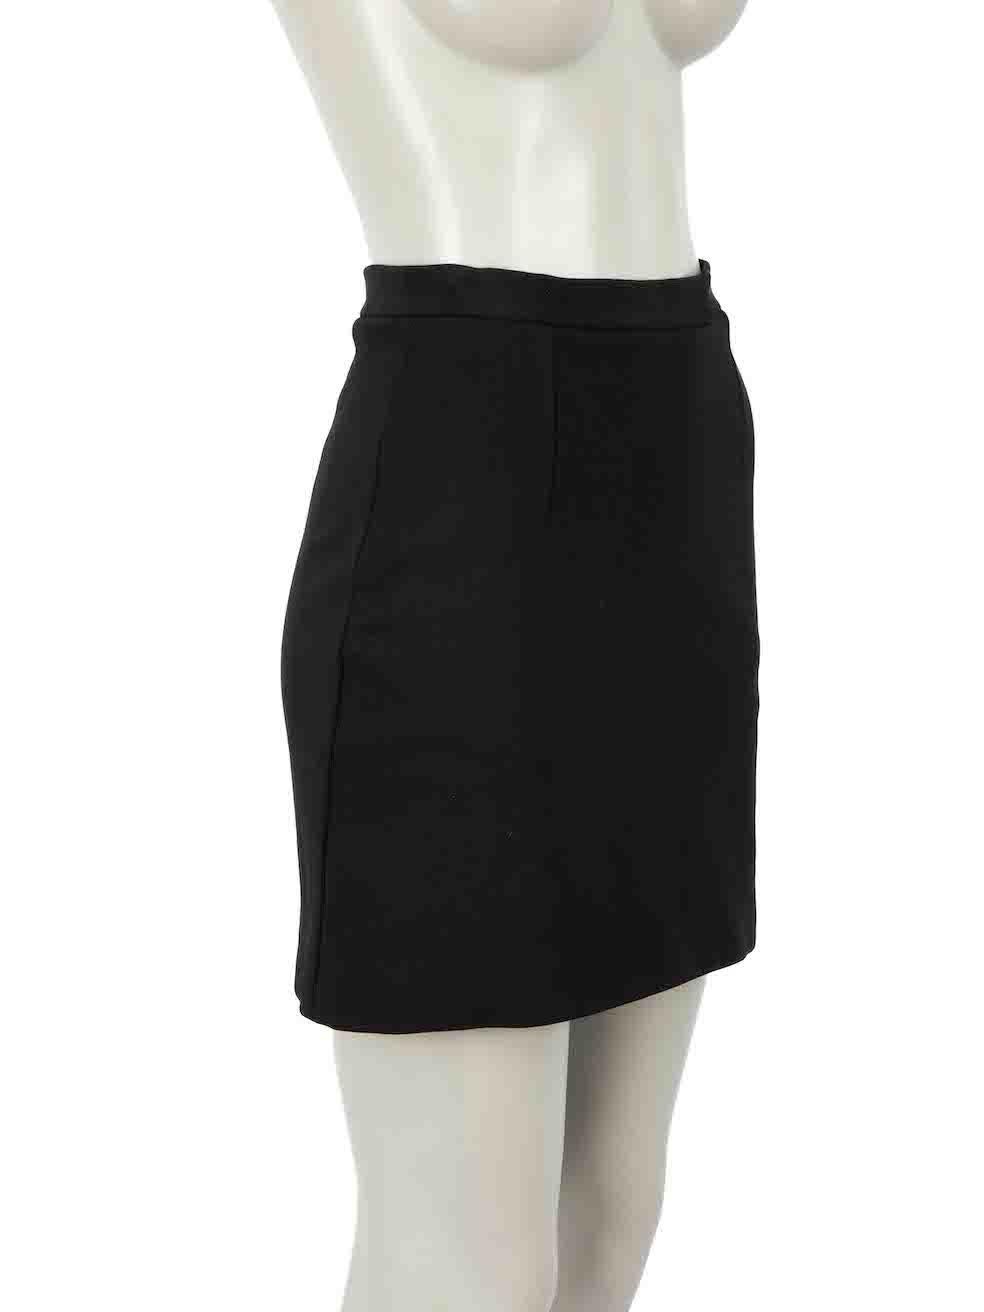 CONDITION is Very good. Minimal wear to skirt is evident. Minimal wear to the front-right with plucks to the weave on this used David Koma designer resale item.
 
Details
Black
Viscse
Skirt
Mini
Figure hugging fit
Stretchy
Back zip fastening
 
Made